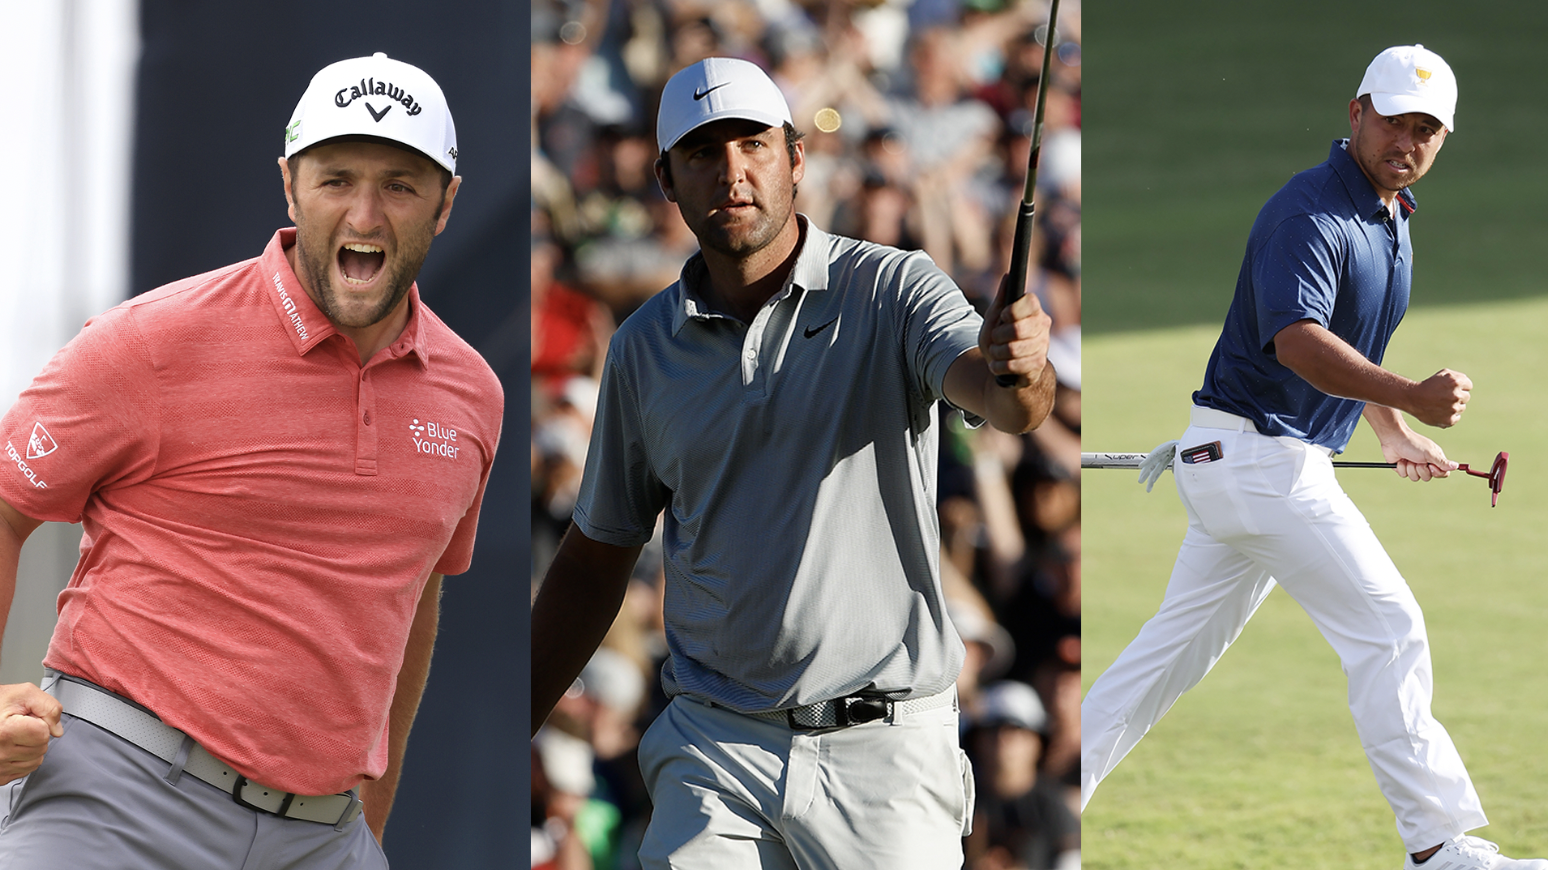 Many of golf's stars are heading to PGA West. Who will rise to the top at The American Express?